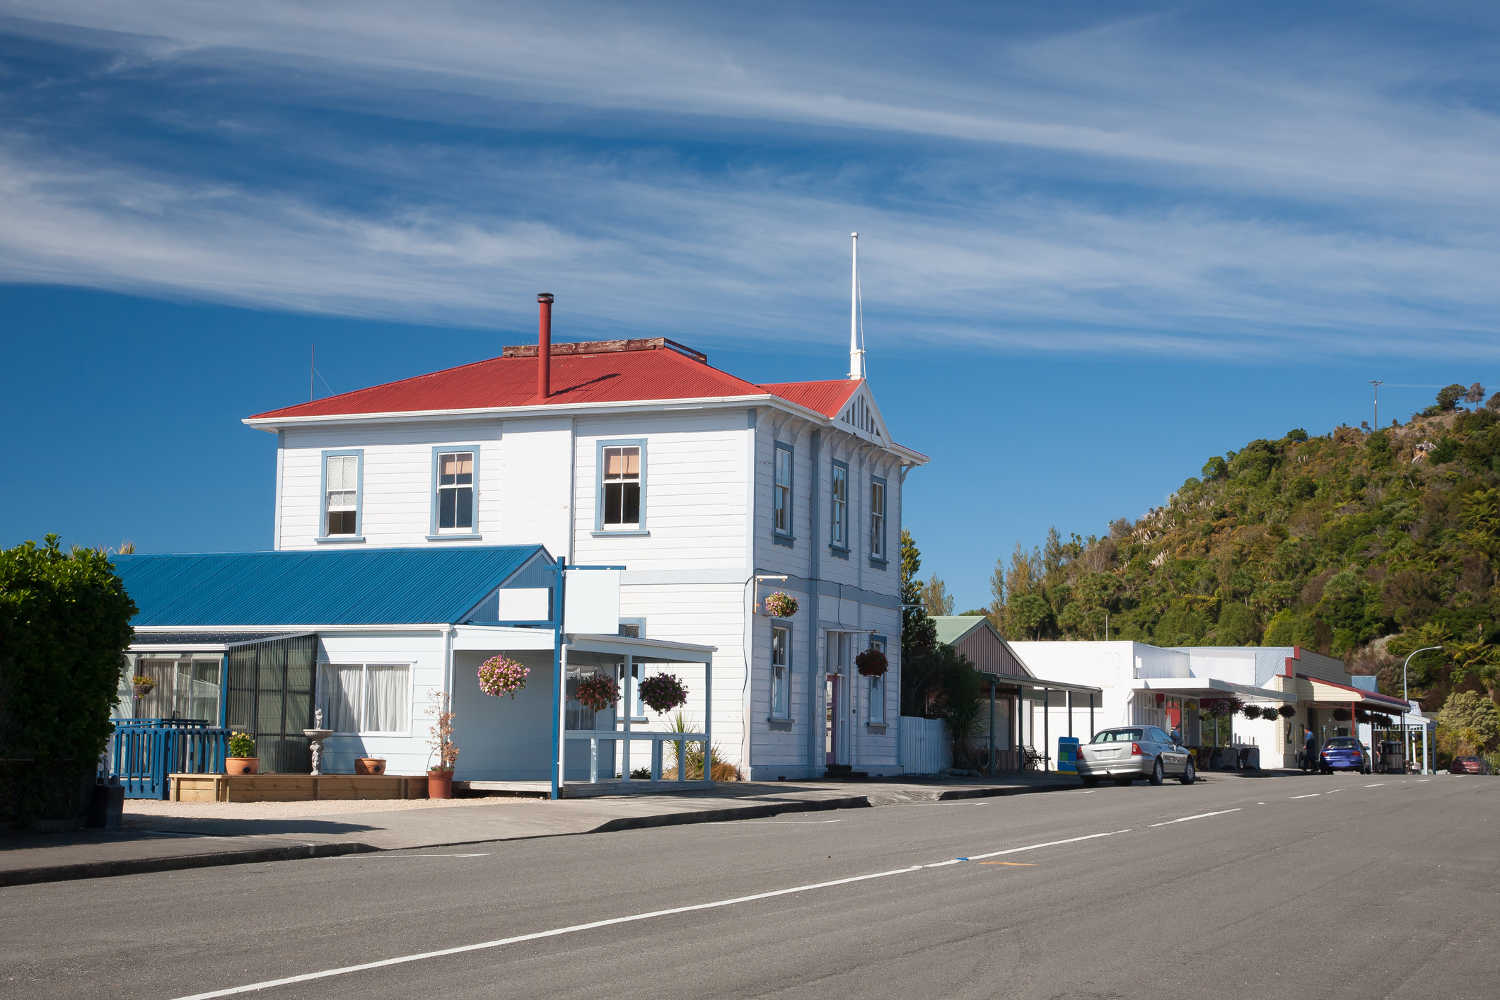 Collingwood heritage Post Office, New Zealand